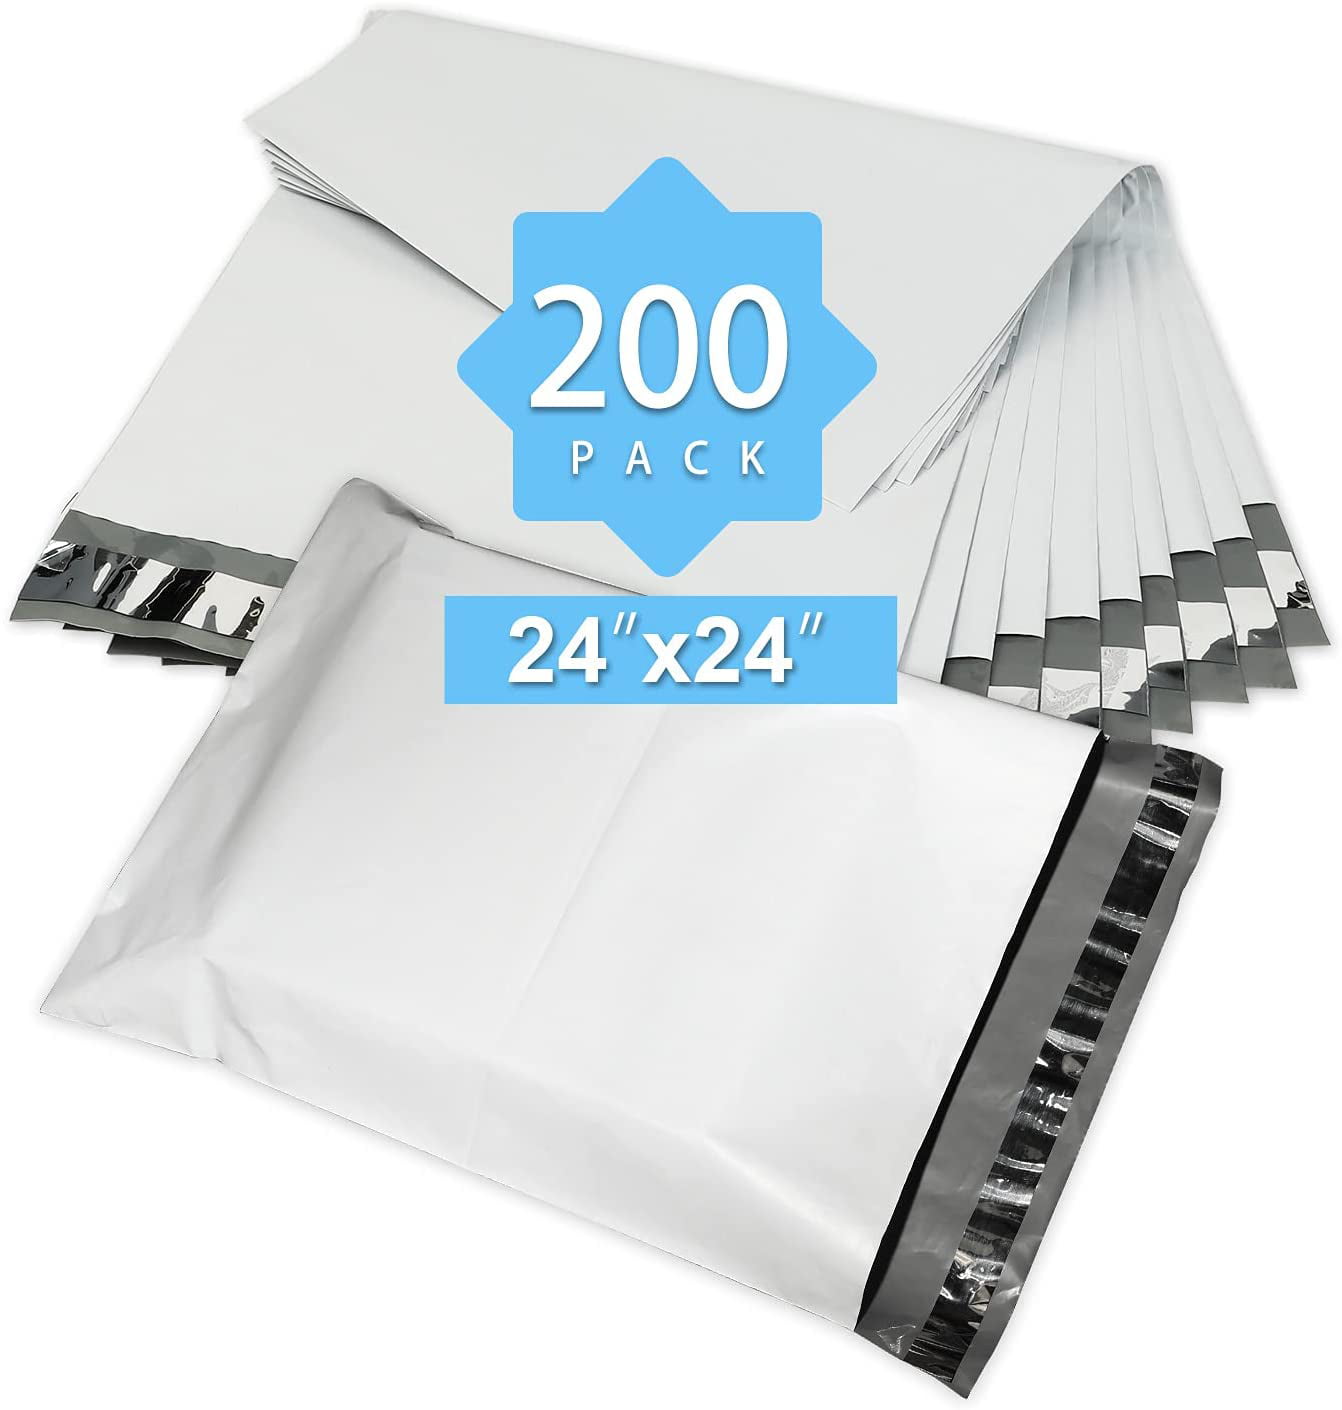 24x24 BLUE POLY MAILERS Shipping Envelopes Self Sealing Mailing Bags 24" x 24" 